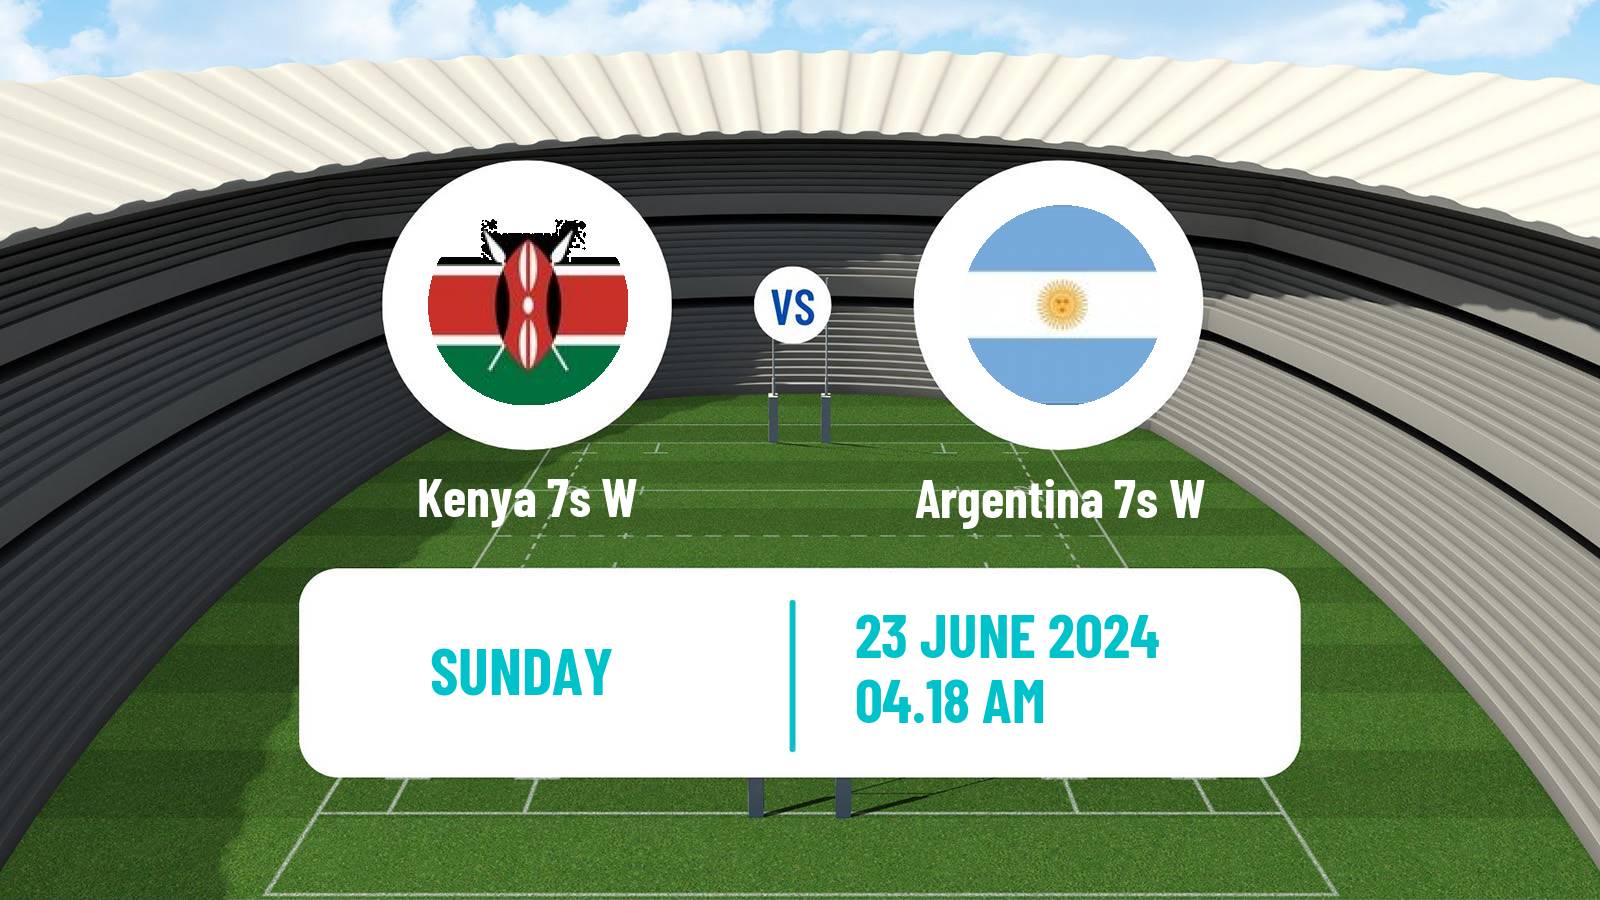 Rugby union Olympic Games 7s Rugby Women Kenya 7s W - Argentina 7s W